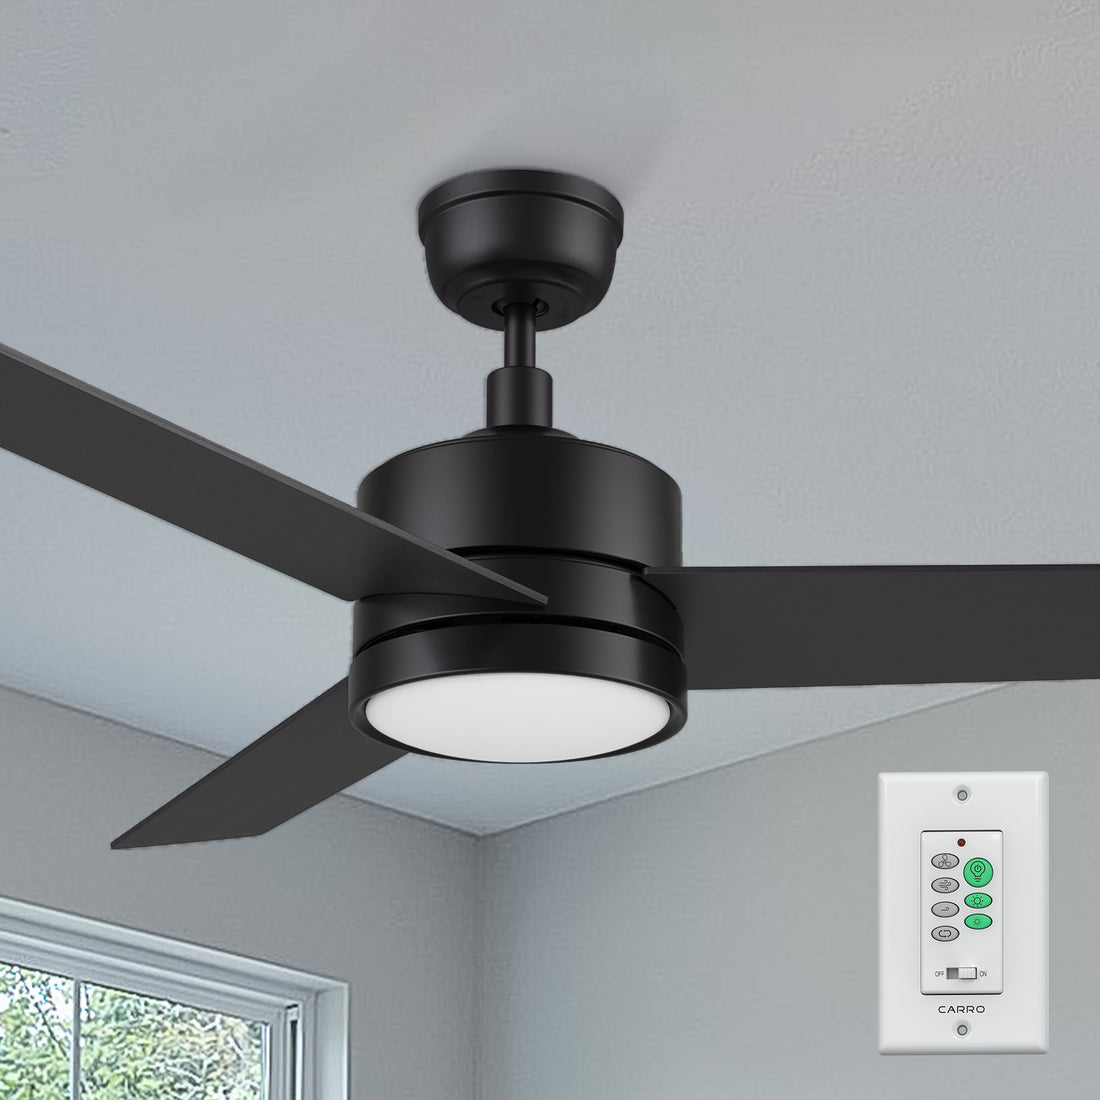 52 inch Louy ceiling fan with LED lights and wall switch control.